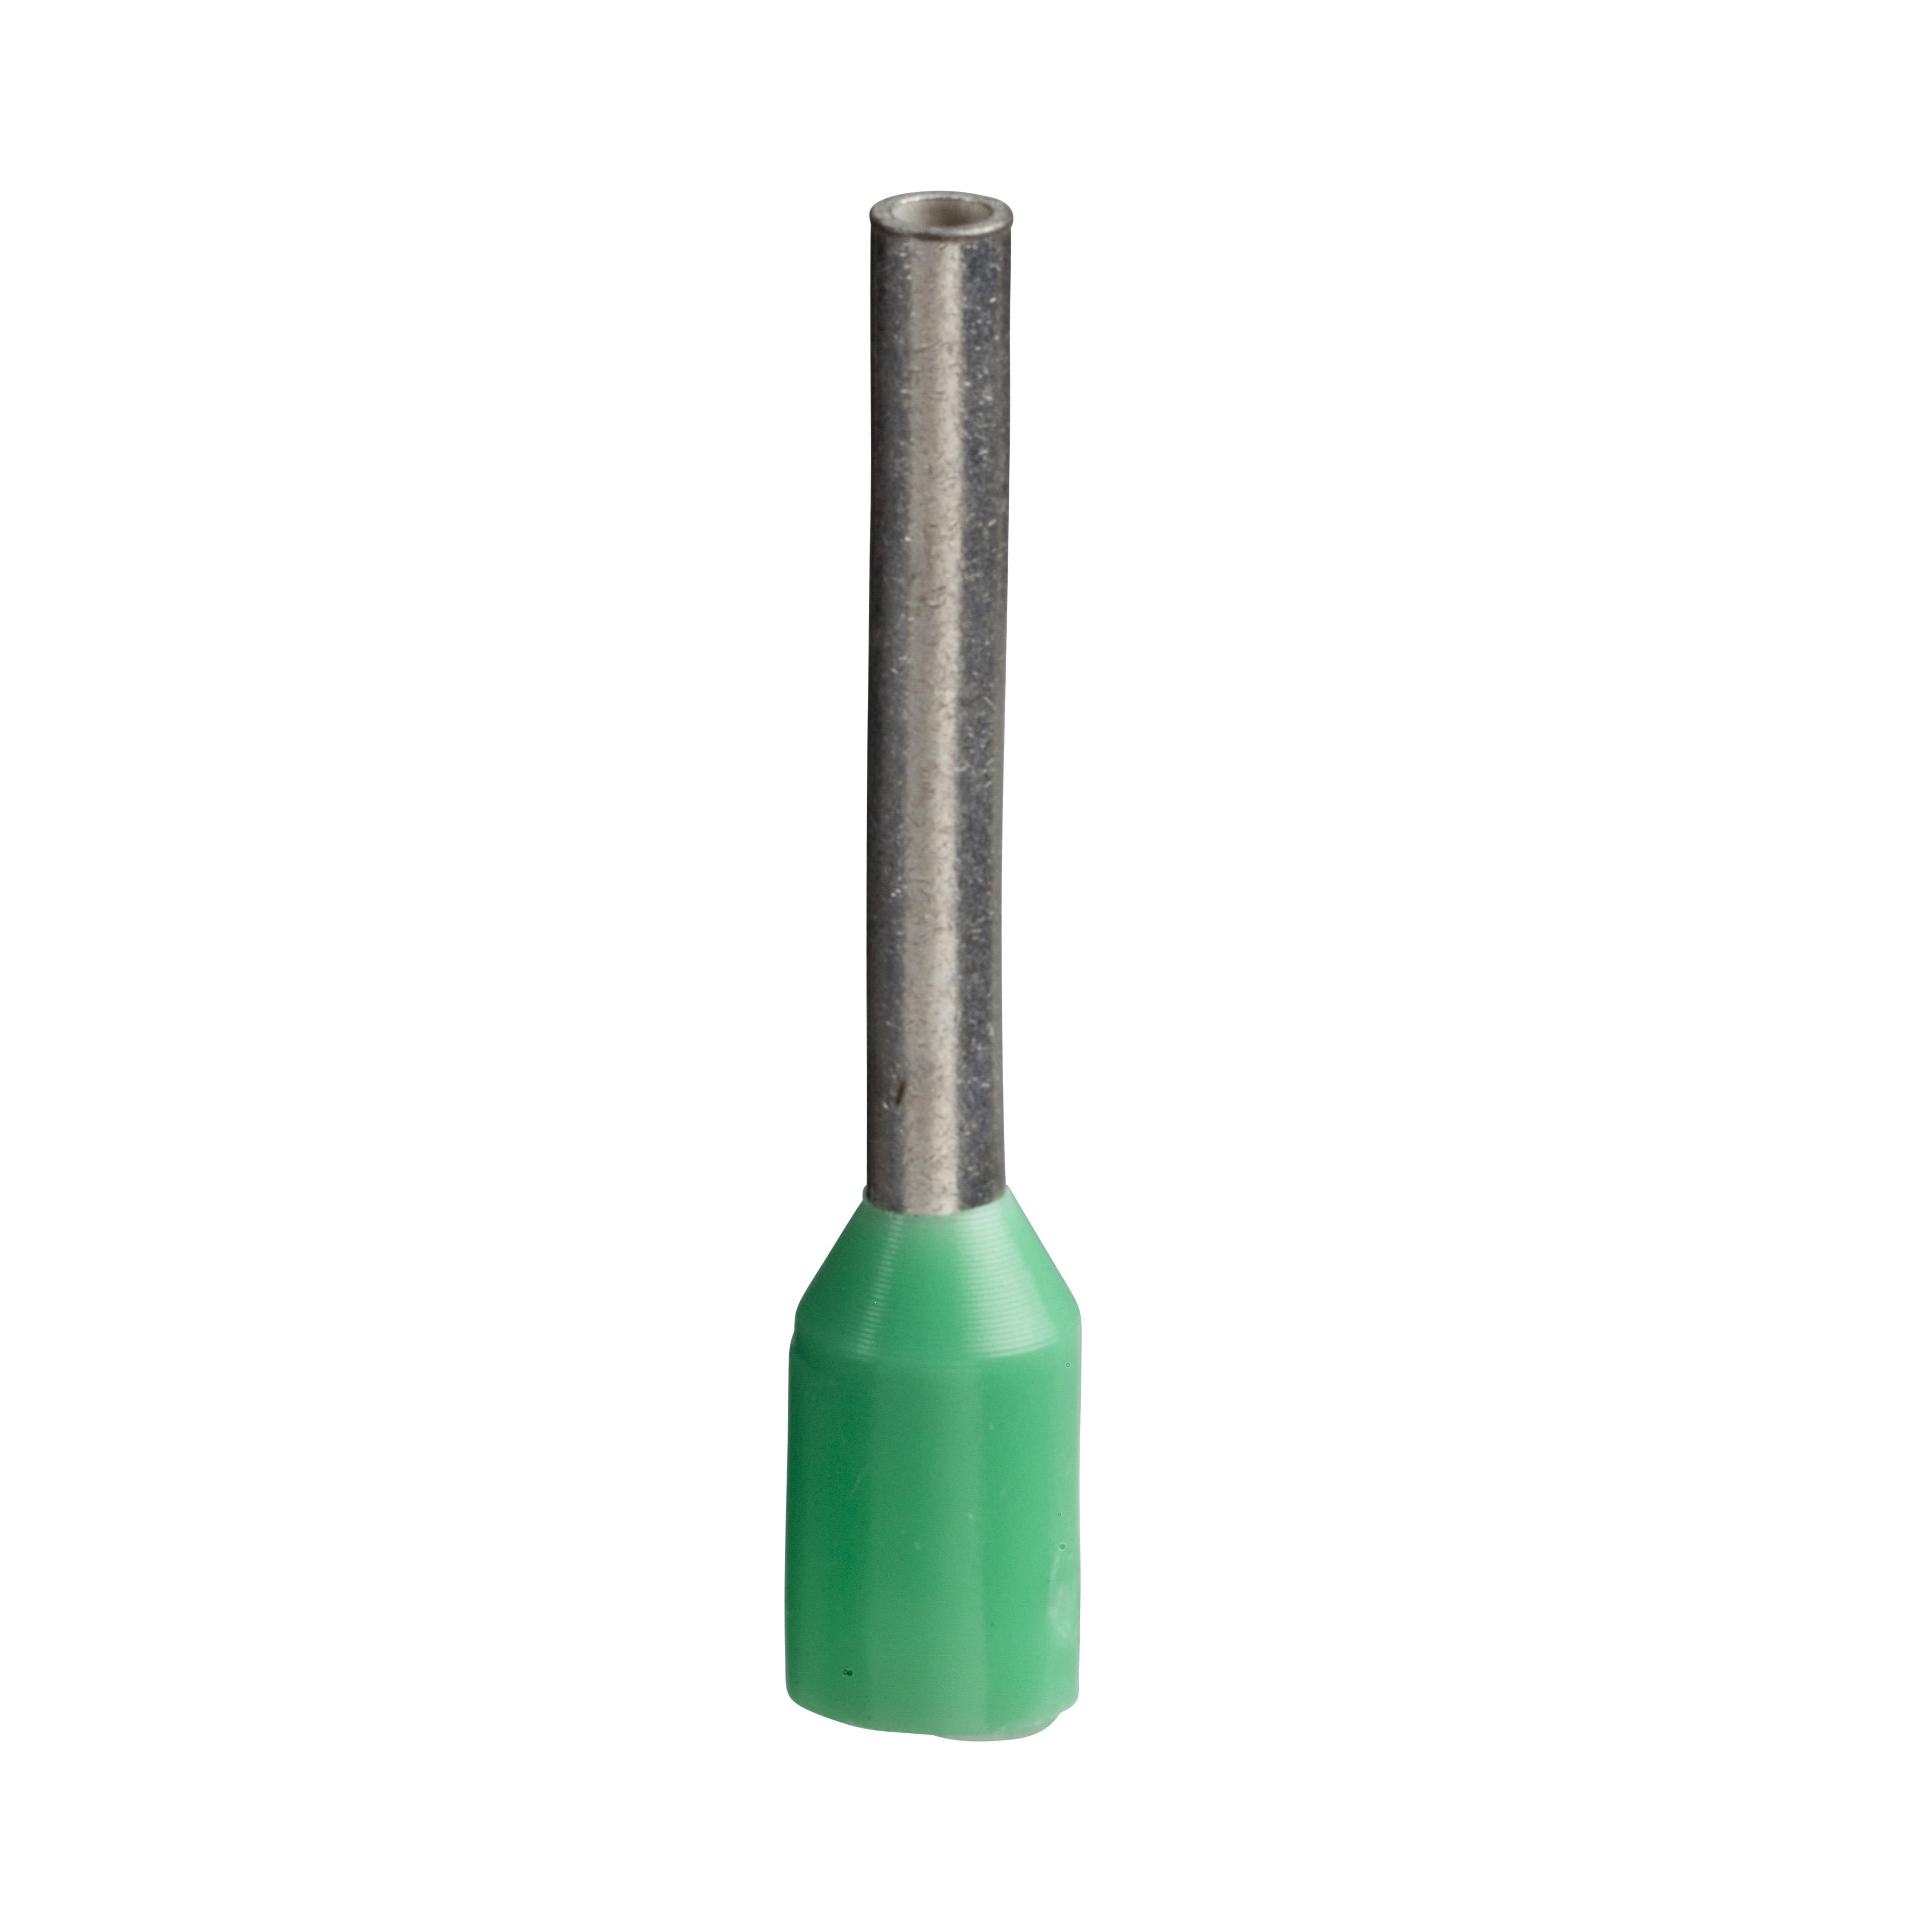 【DZ5CE062】GREEN CABLE END